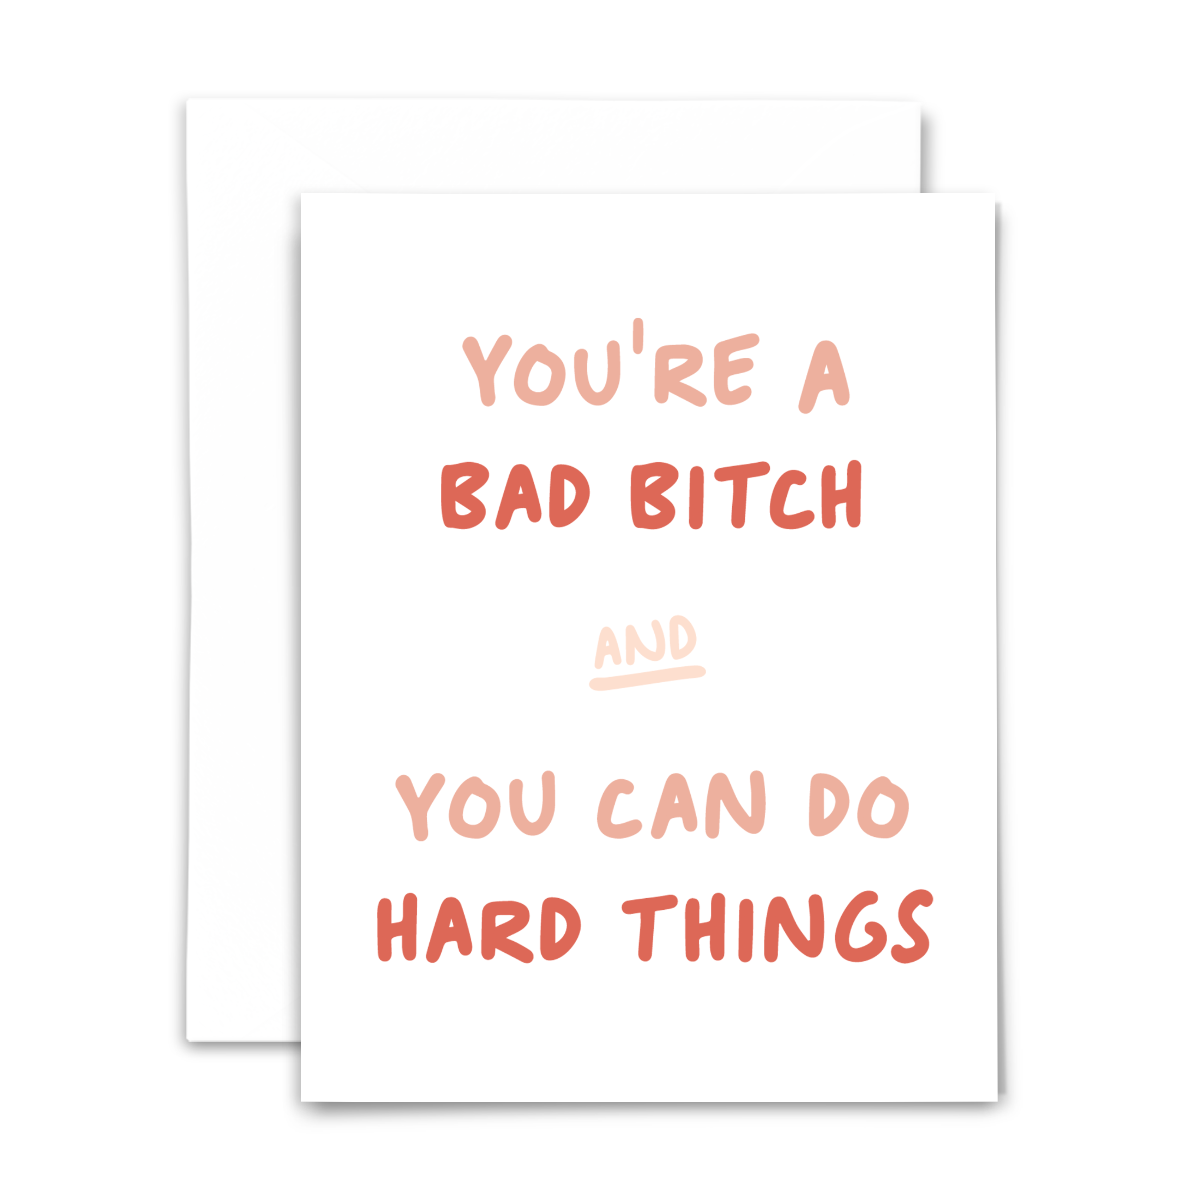 'You're a bad bish and you can do hard things' greeting card with blank interior; pink and coral text on white